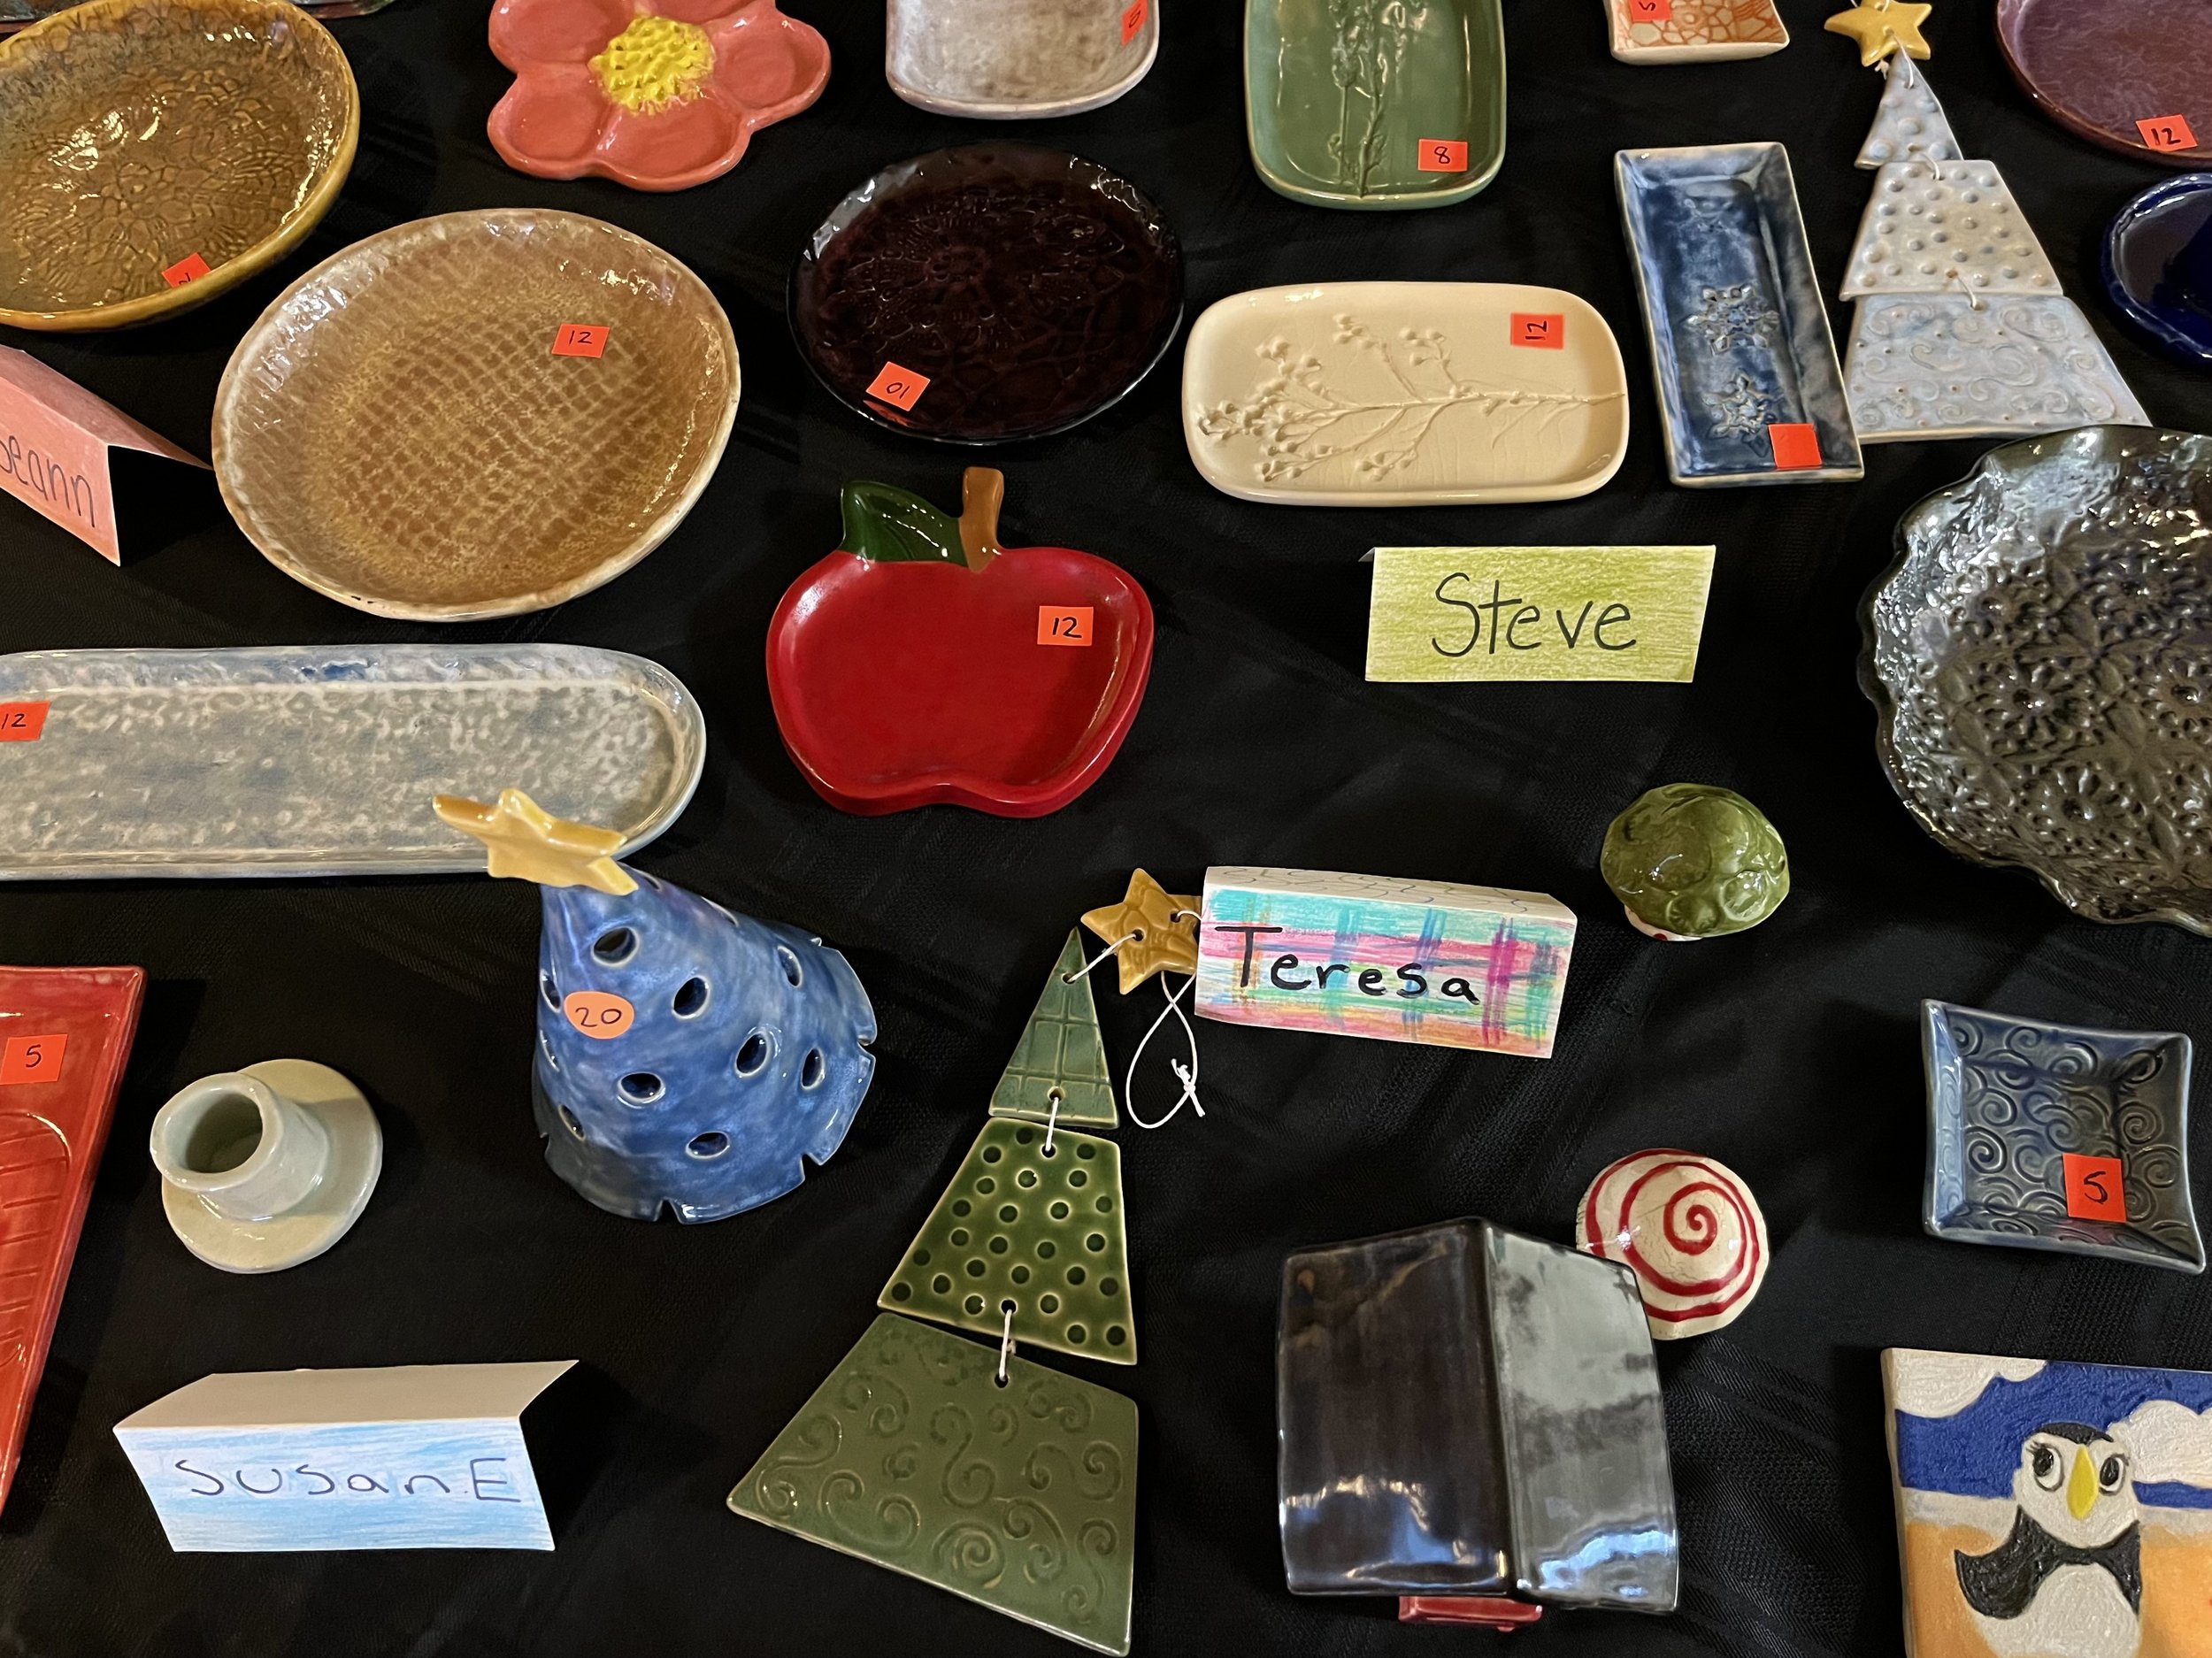  Creative Identity Anaheim participants artwork, including ceramics, being sold at the 27th Annual Winter Concert to attendees. 